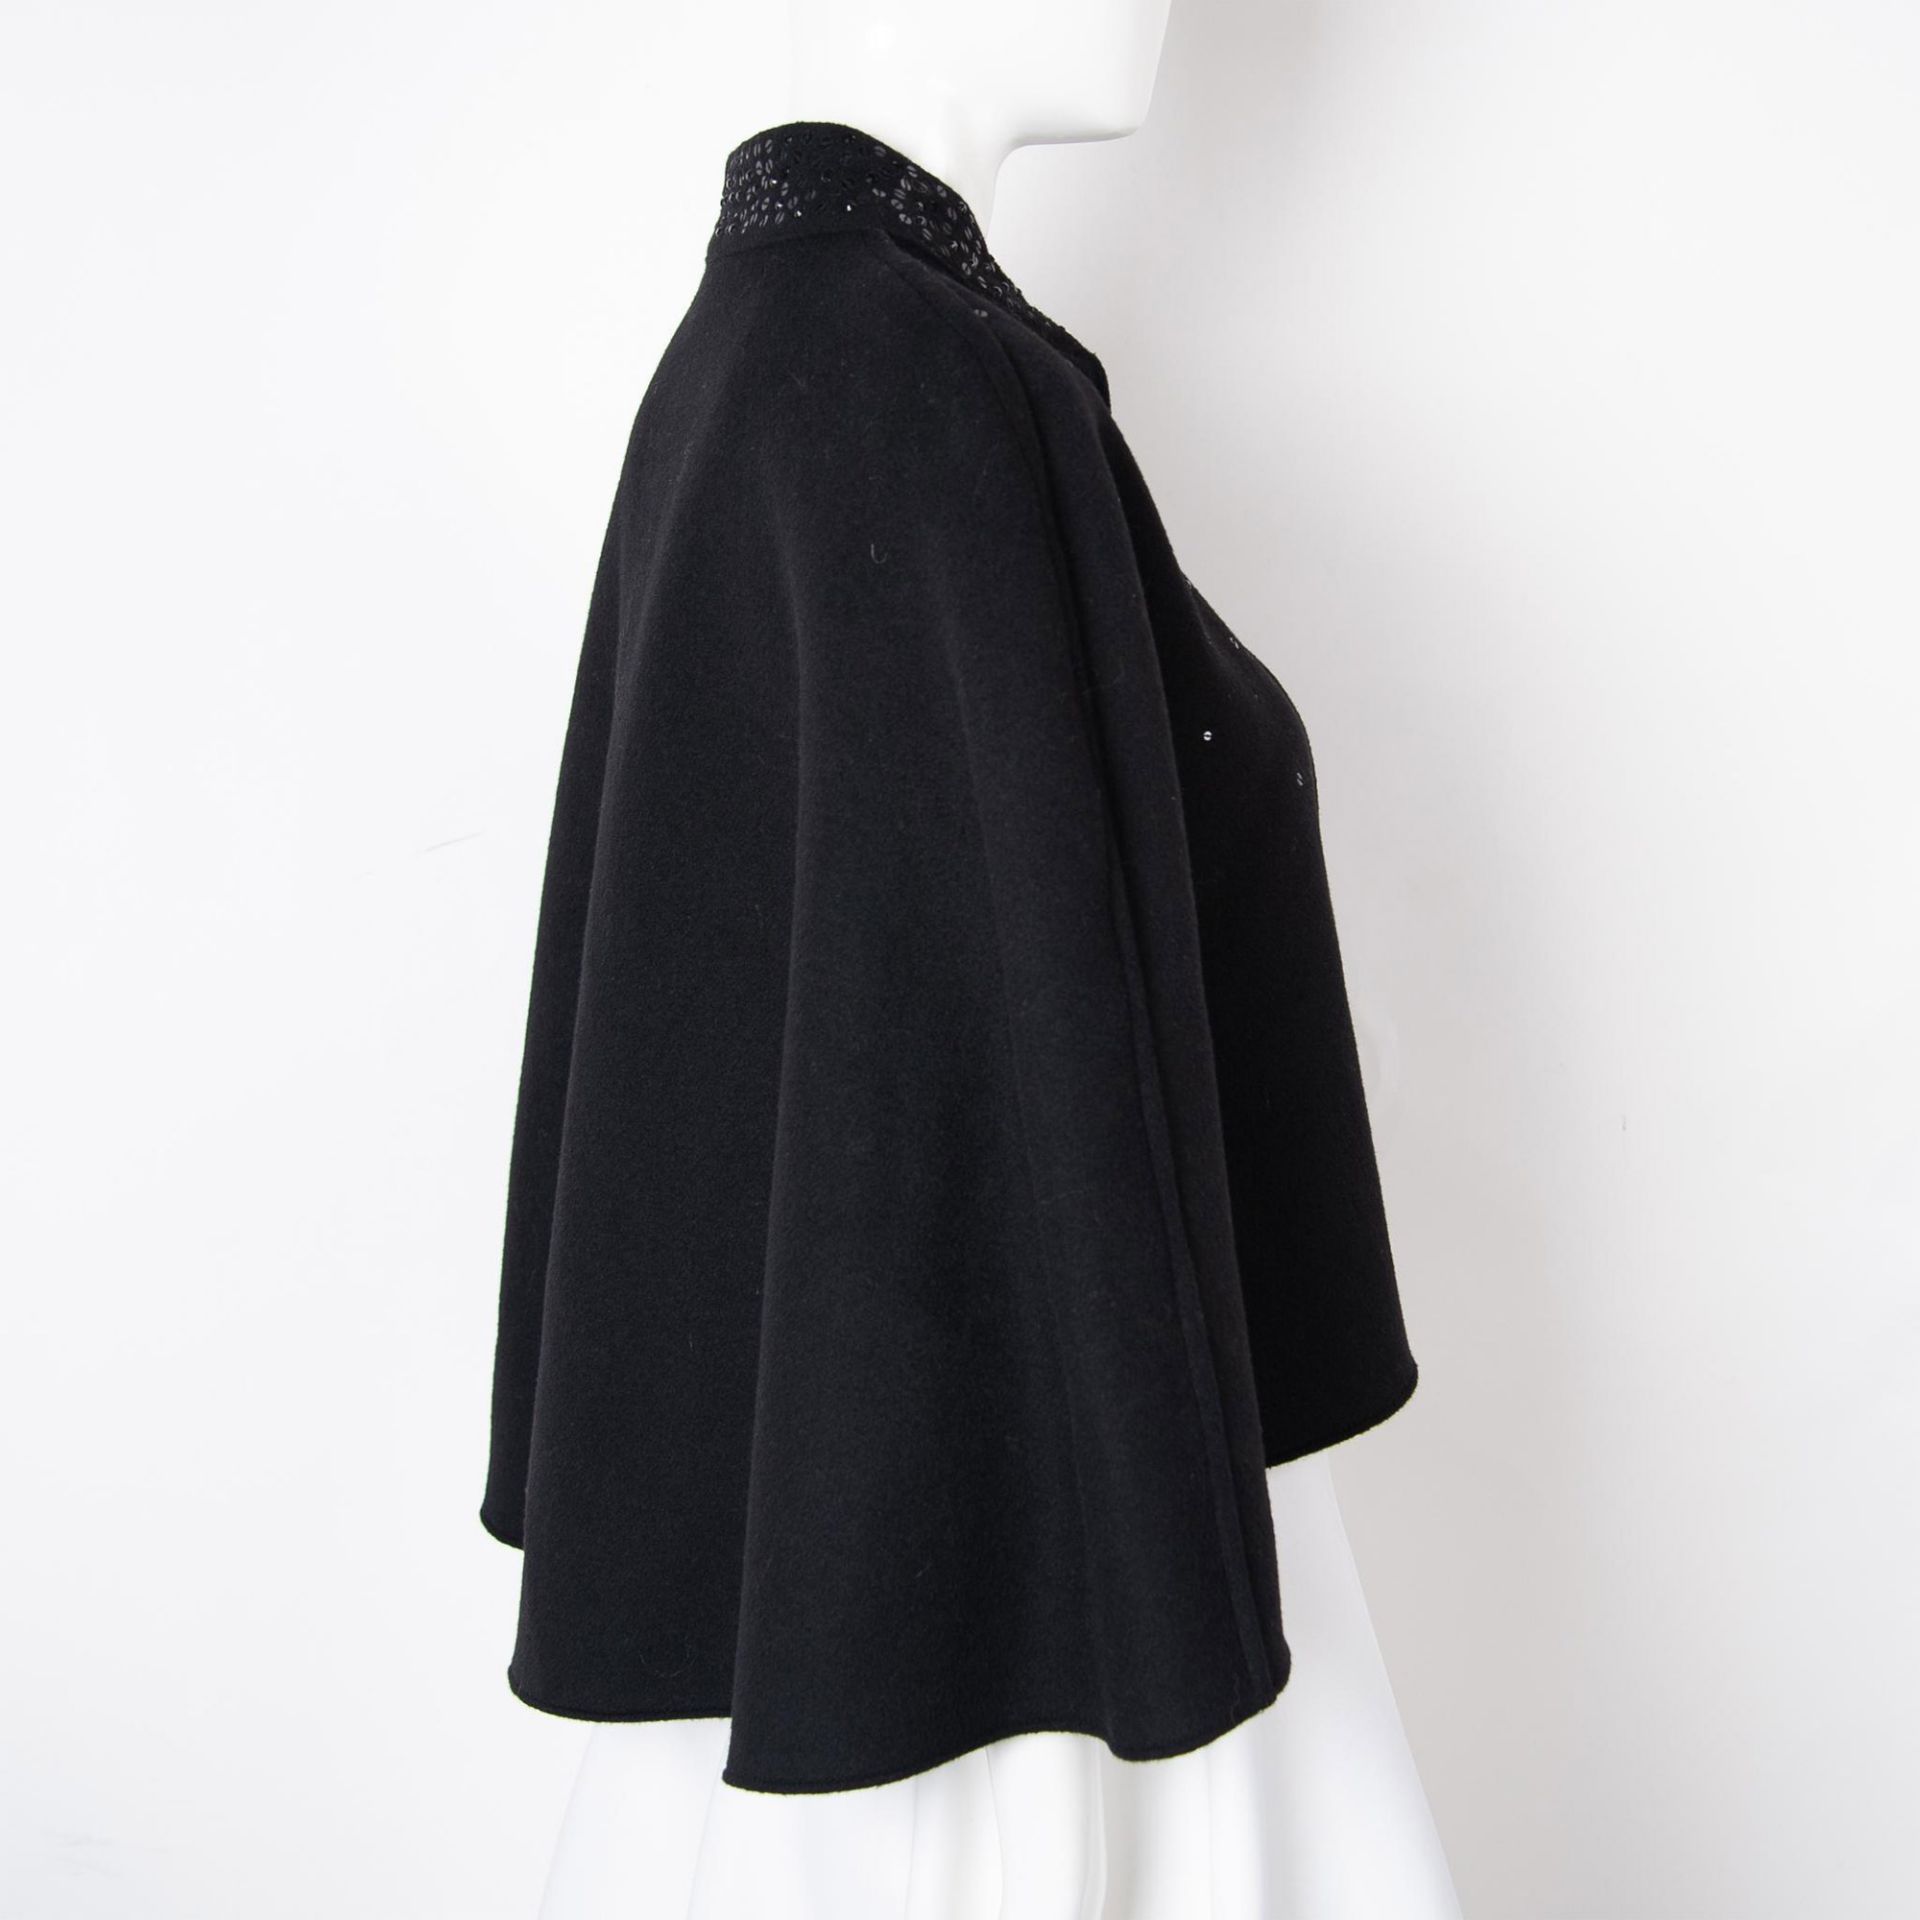 Prabal Gurung for Neiman Marcus Wool Cape Jacket, One Size - Image 4 of 6